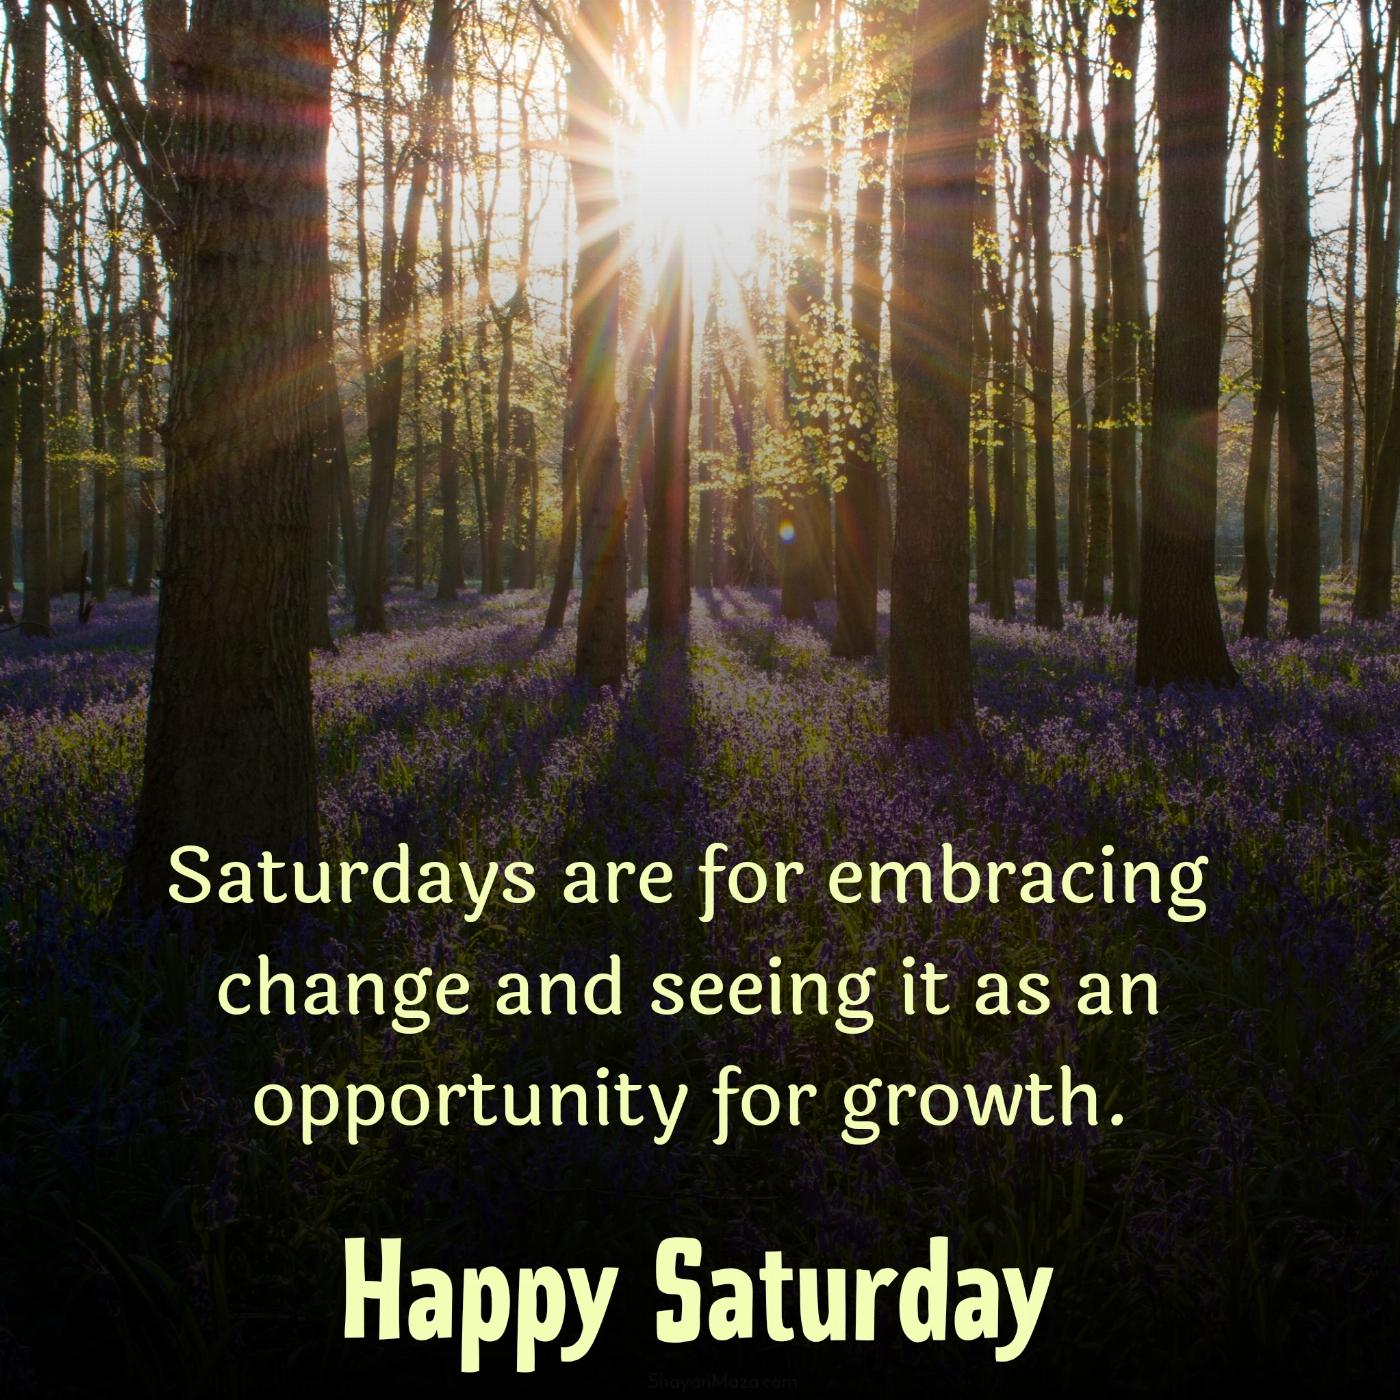 Saturdays are for embracing change and seeing it as an opportunity